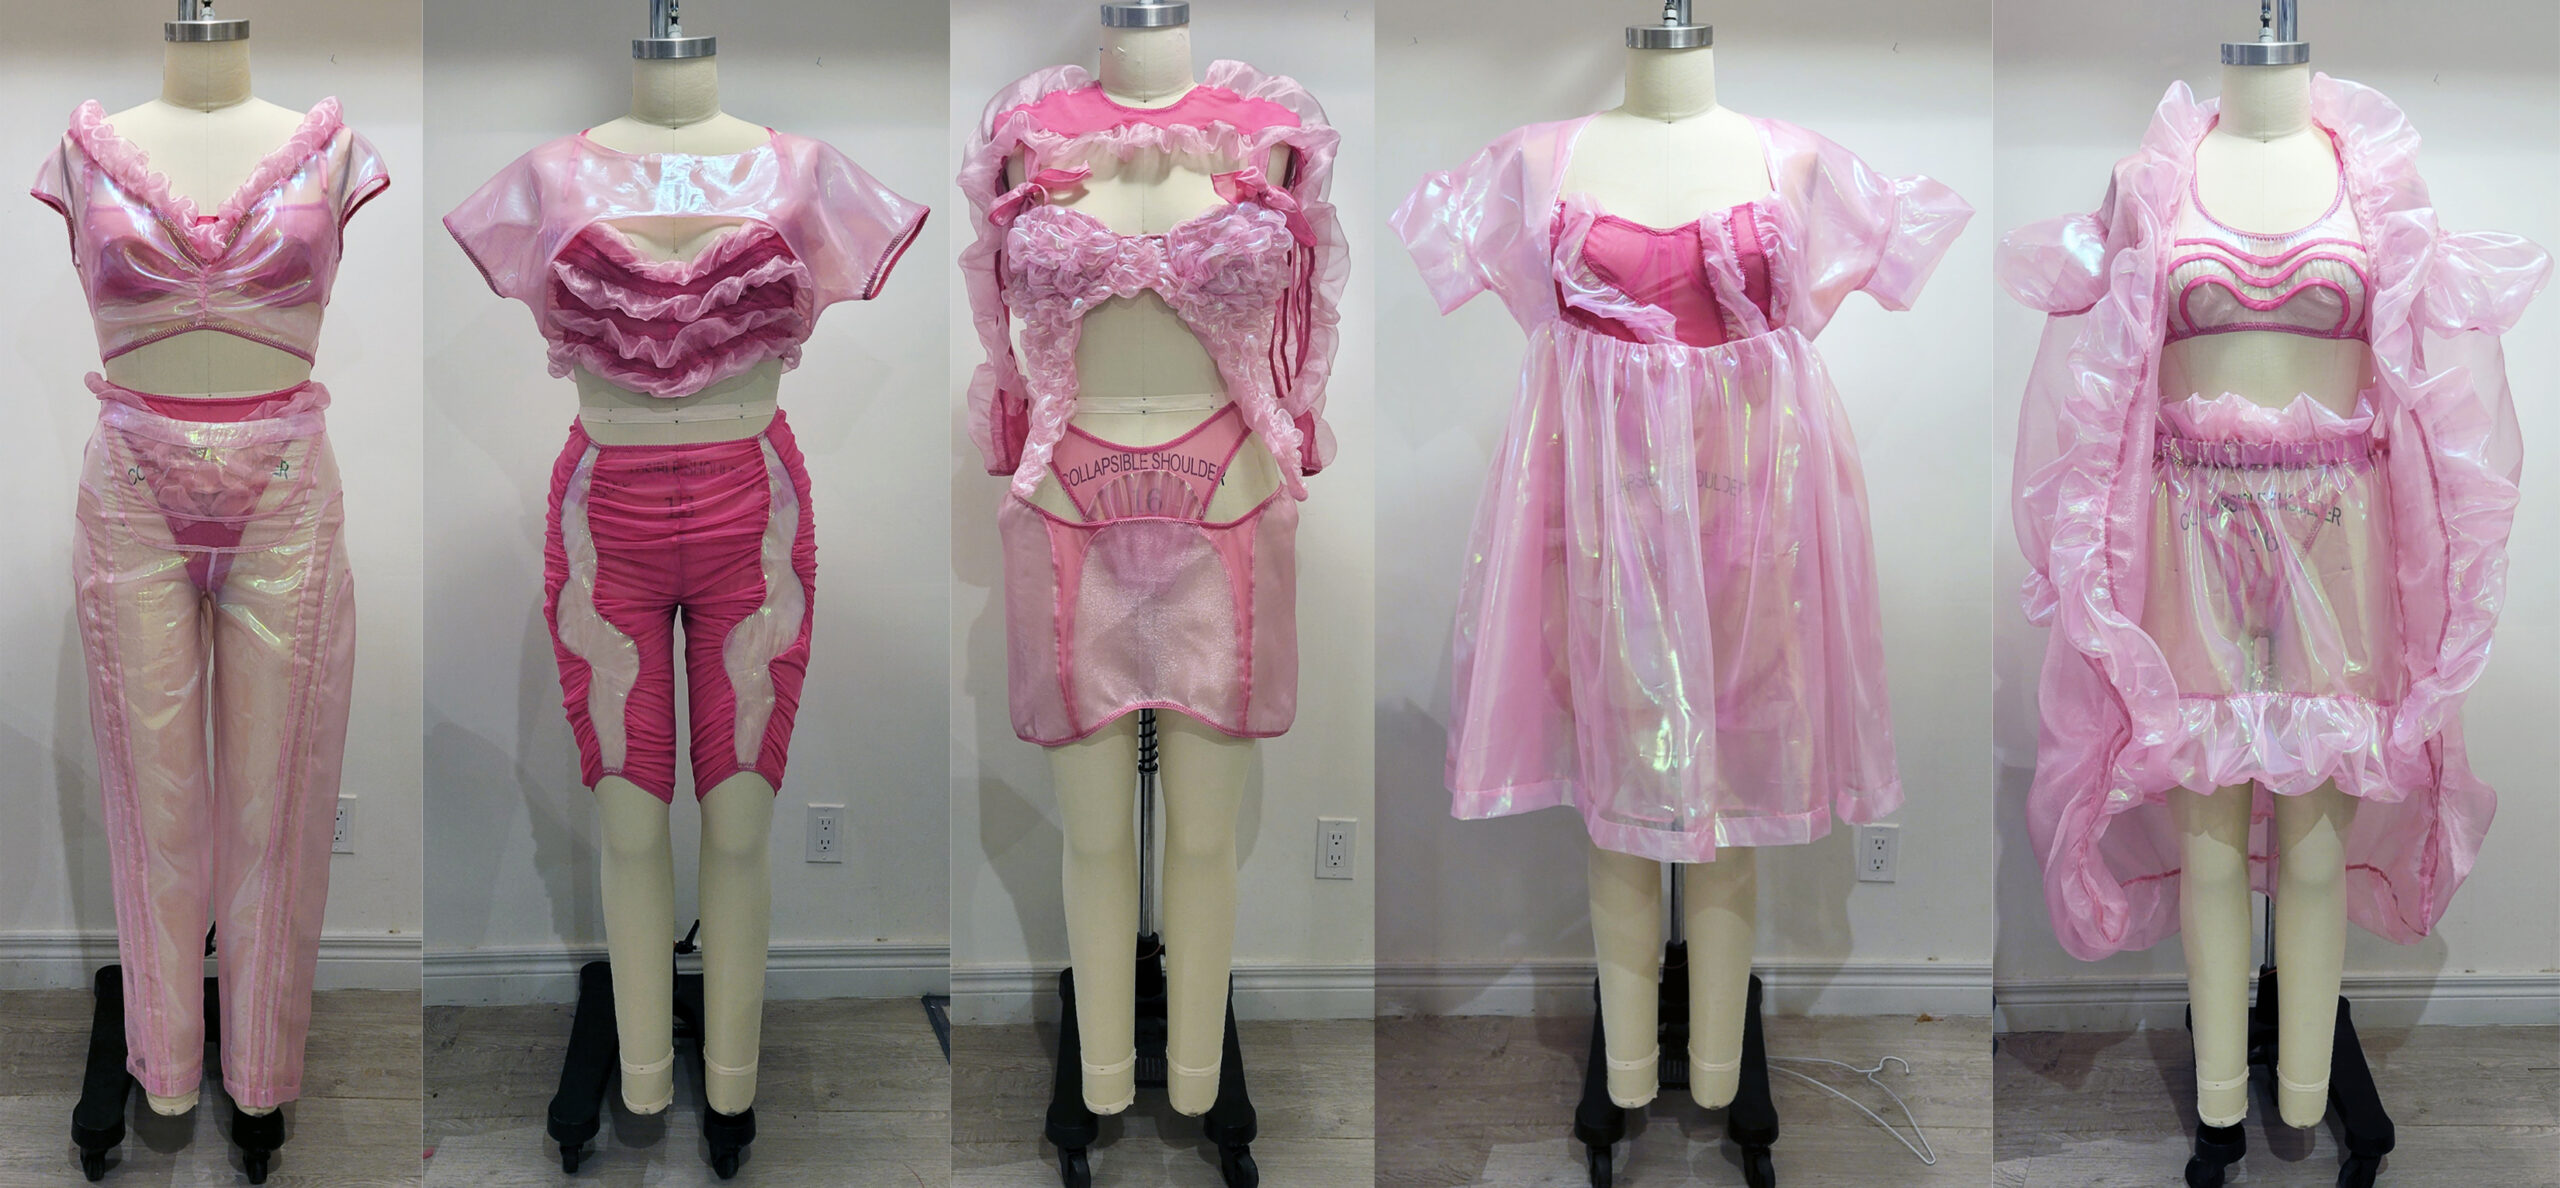 Lineup of all five outfits photographed individually on a dress form